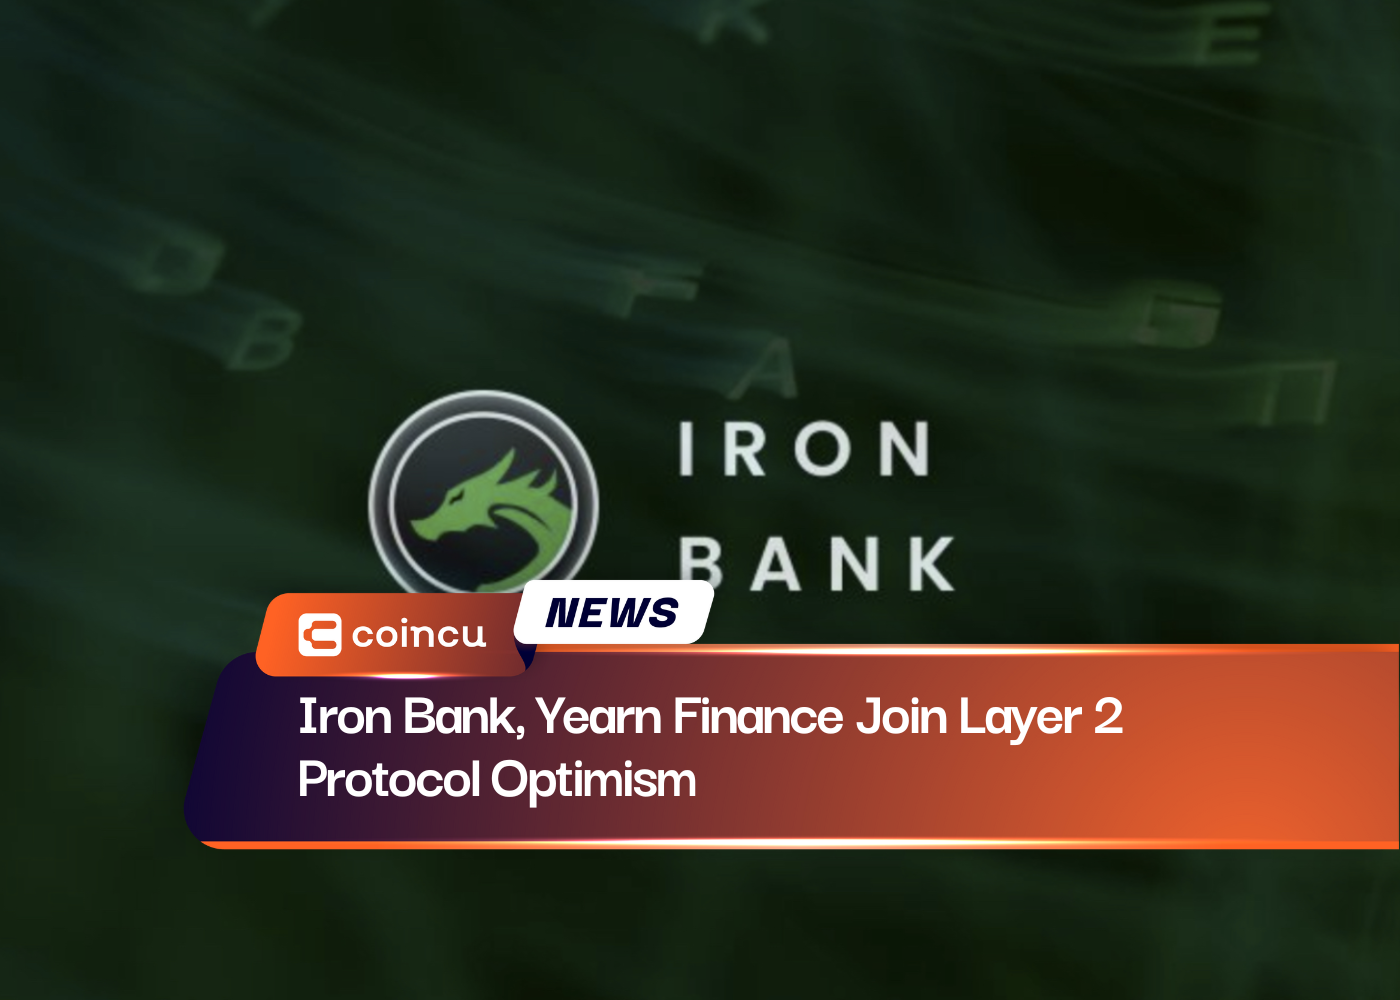 Iron Bank, Yearn Finance Join Layer 2 Protocol Optimism